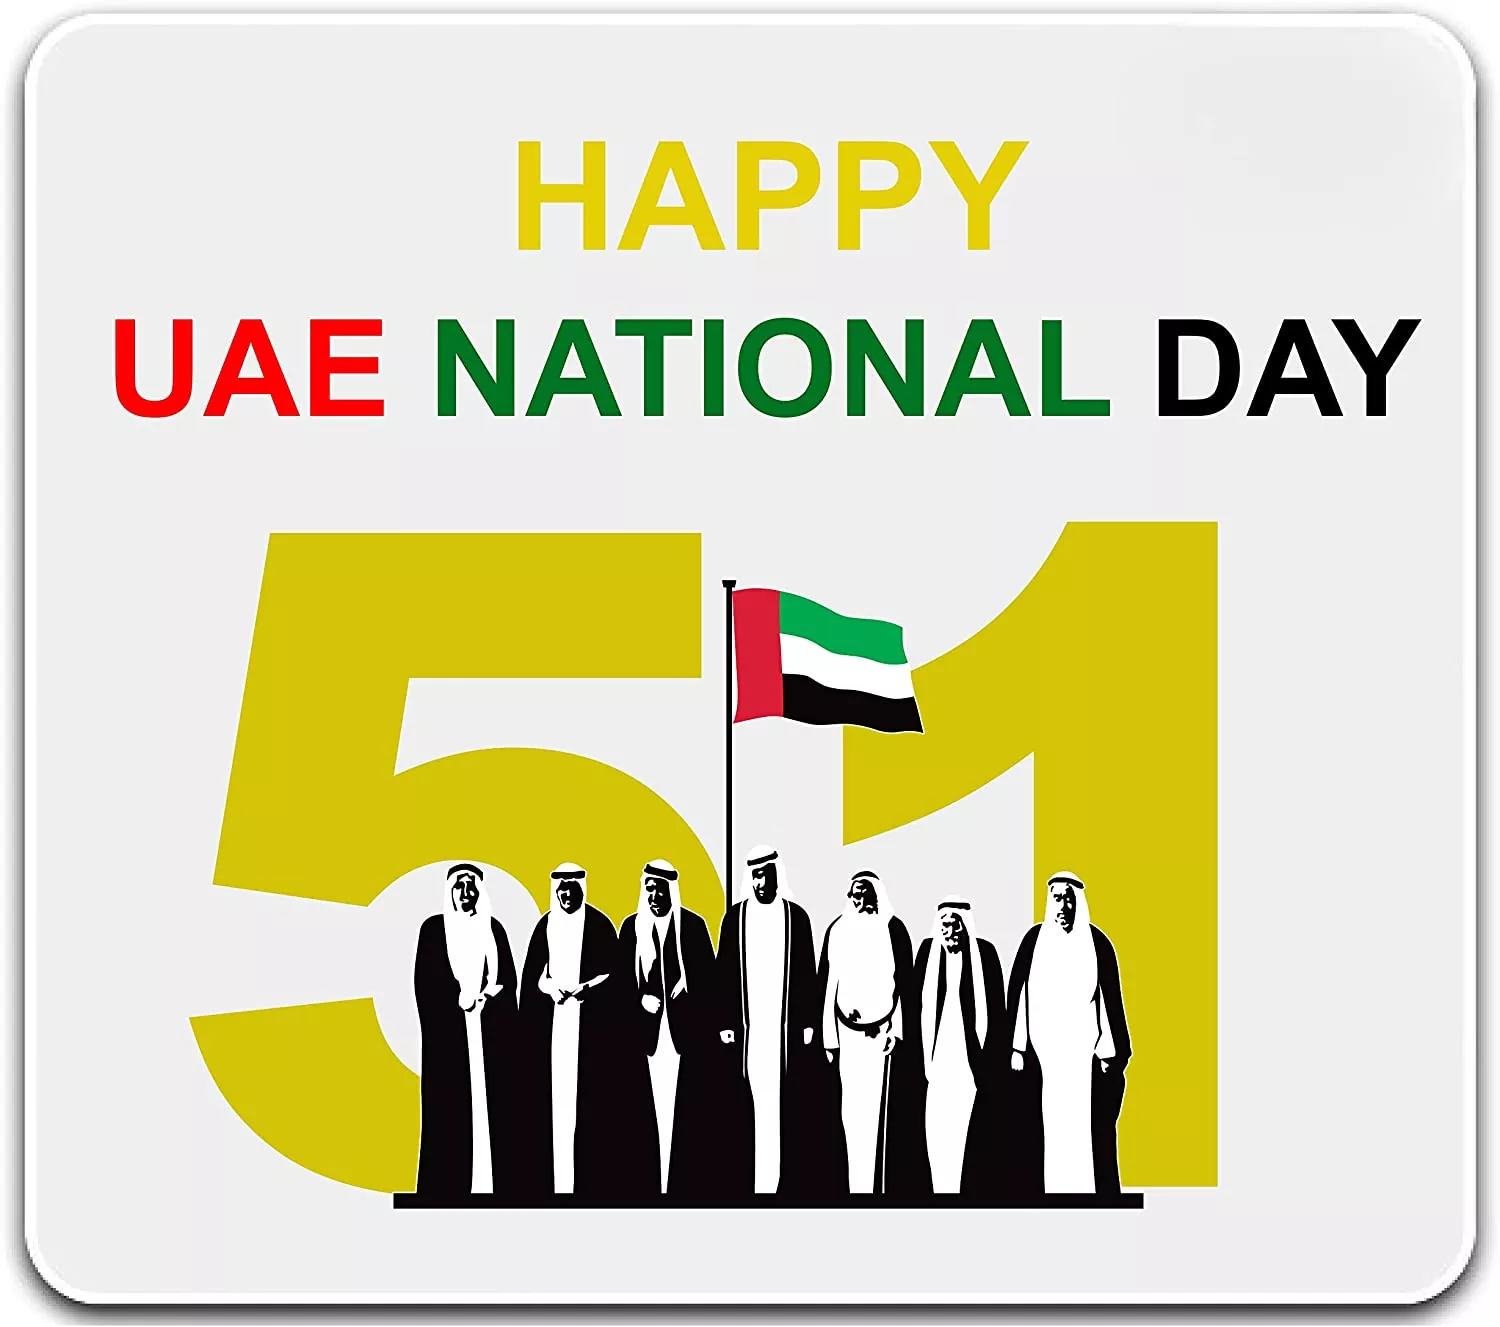 UAE NATIONAL DAY MOUSE PAD (Design 6)